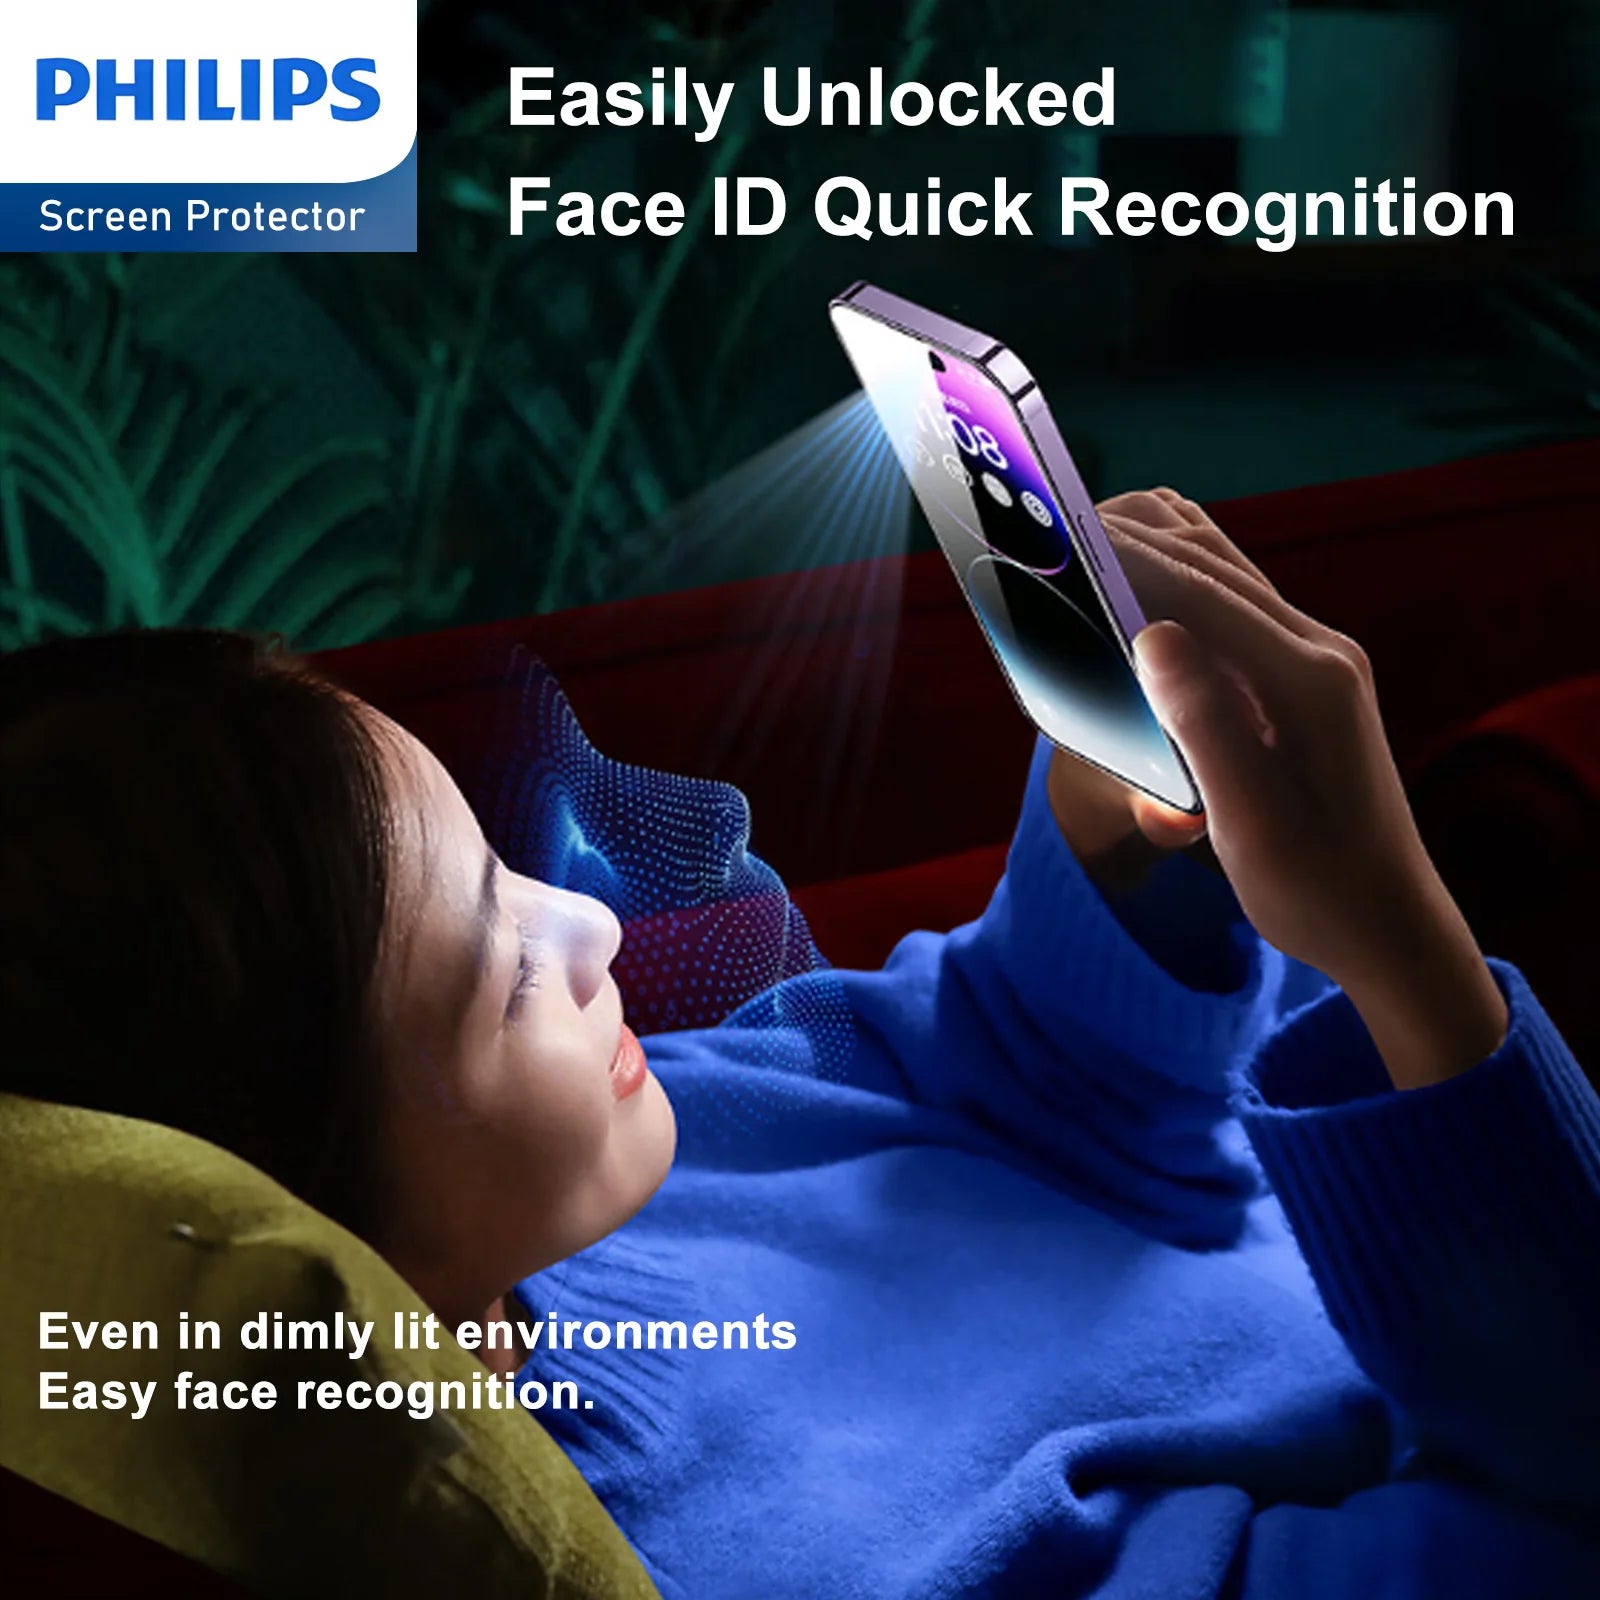 Philips 9H Tempered HD Clear Glass Screen Protector Film For iPhone【Anti-Oil】【Anti-Shatter】【Anti-Fingerprint】【Full Coverage】【Hardness 9H】DLK1209